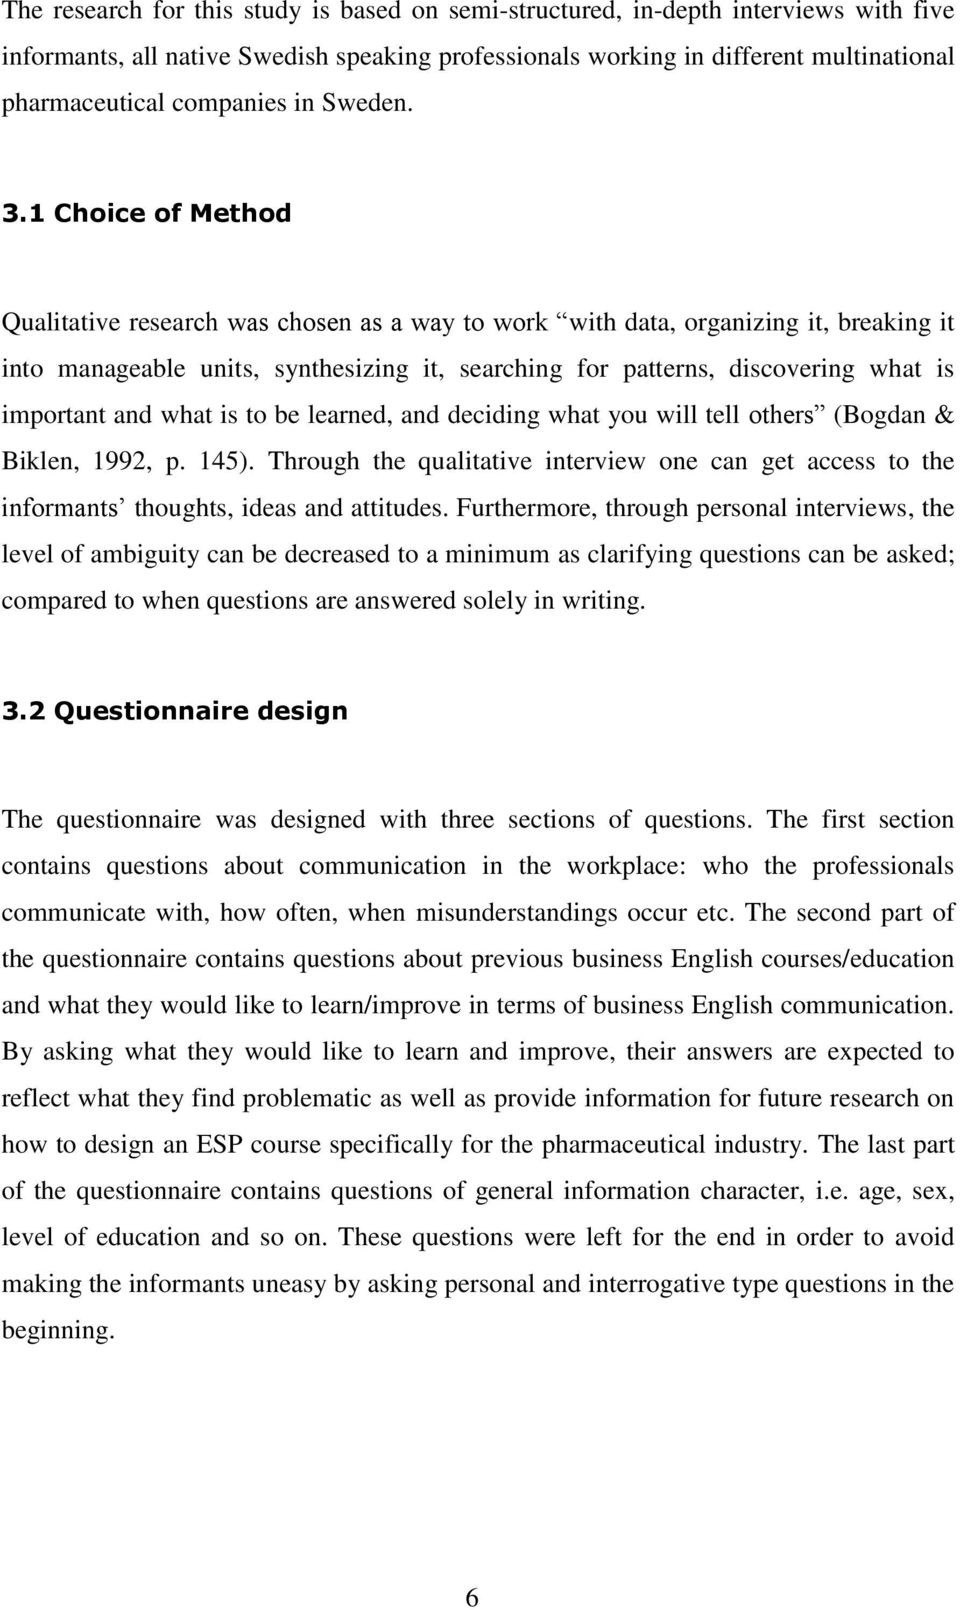 1 Choice of Method Qualitative research was chosen as a way to work with data, organizing it, breaking it into manageable units, synthesizing it, searching for patterns, discovering what is important